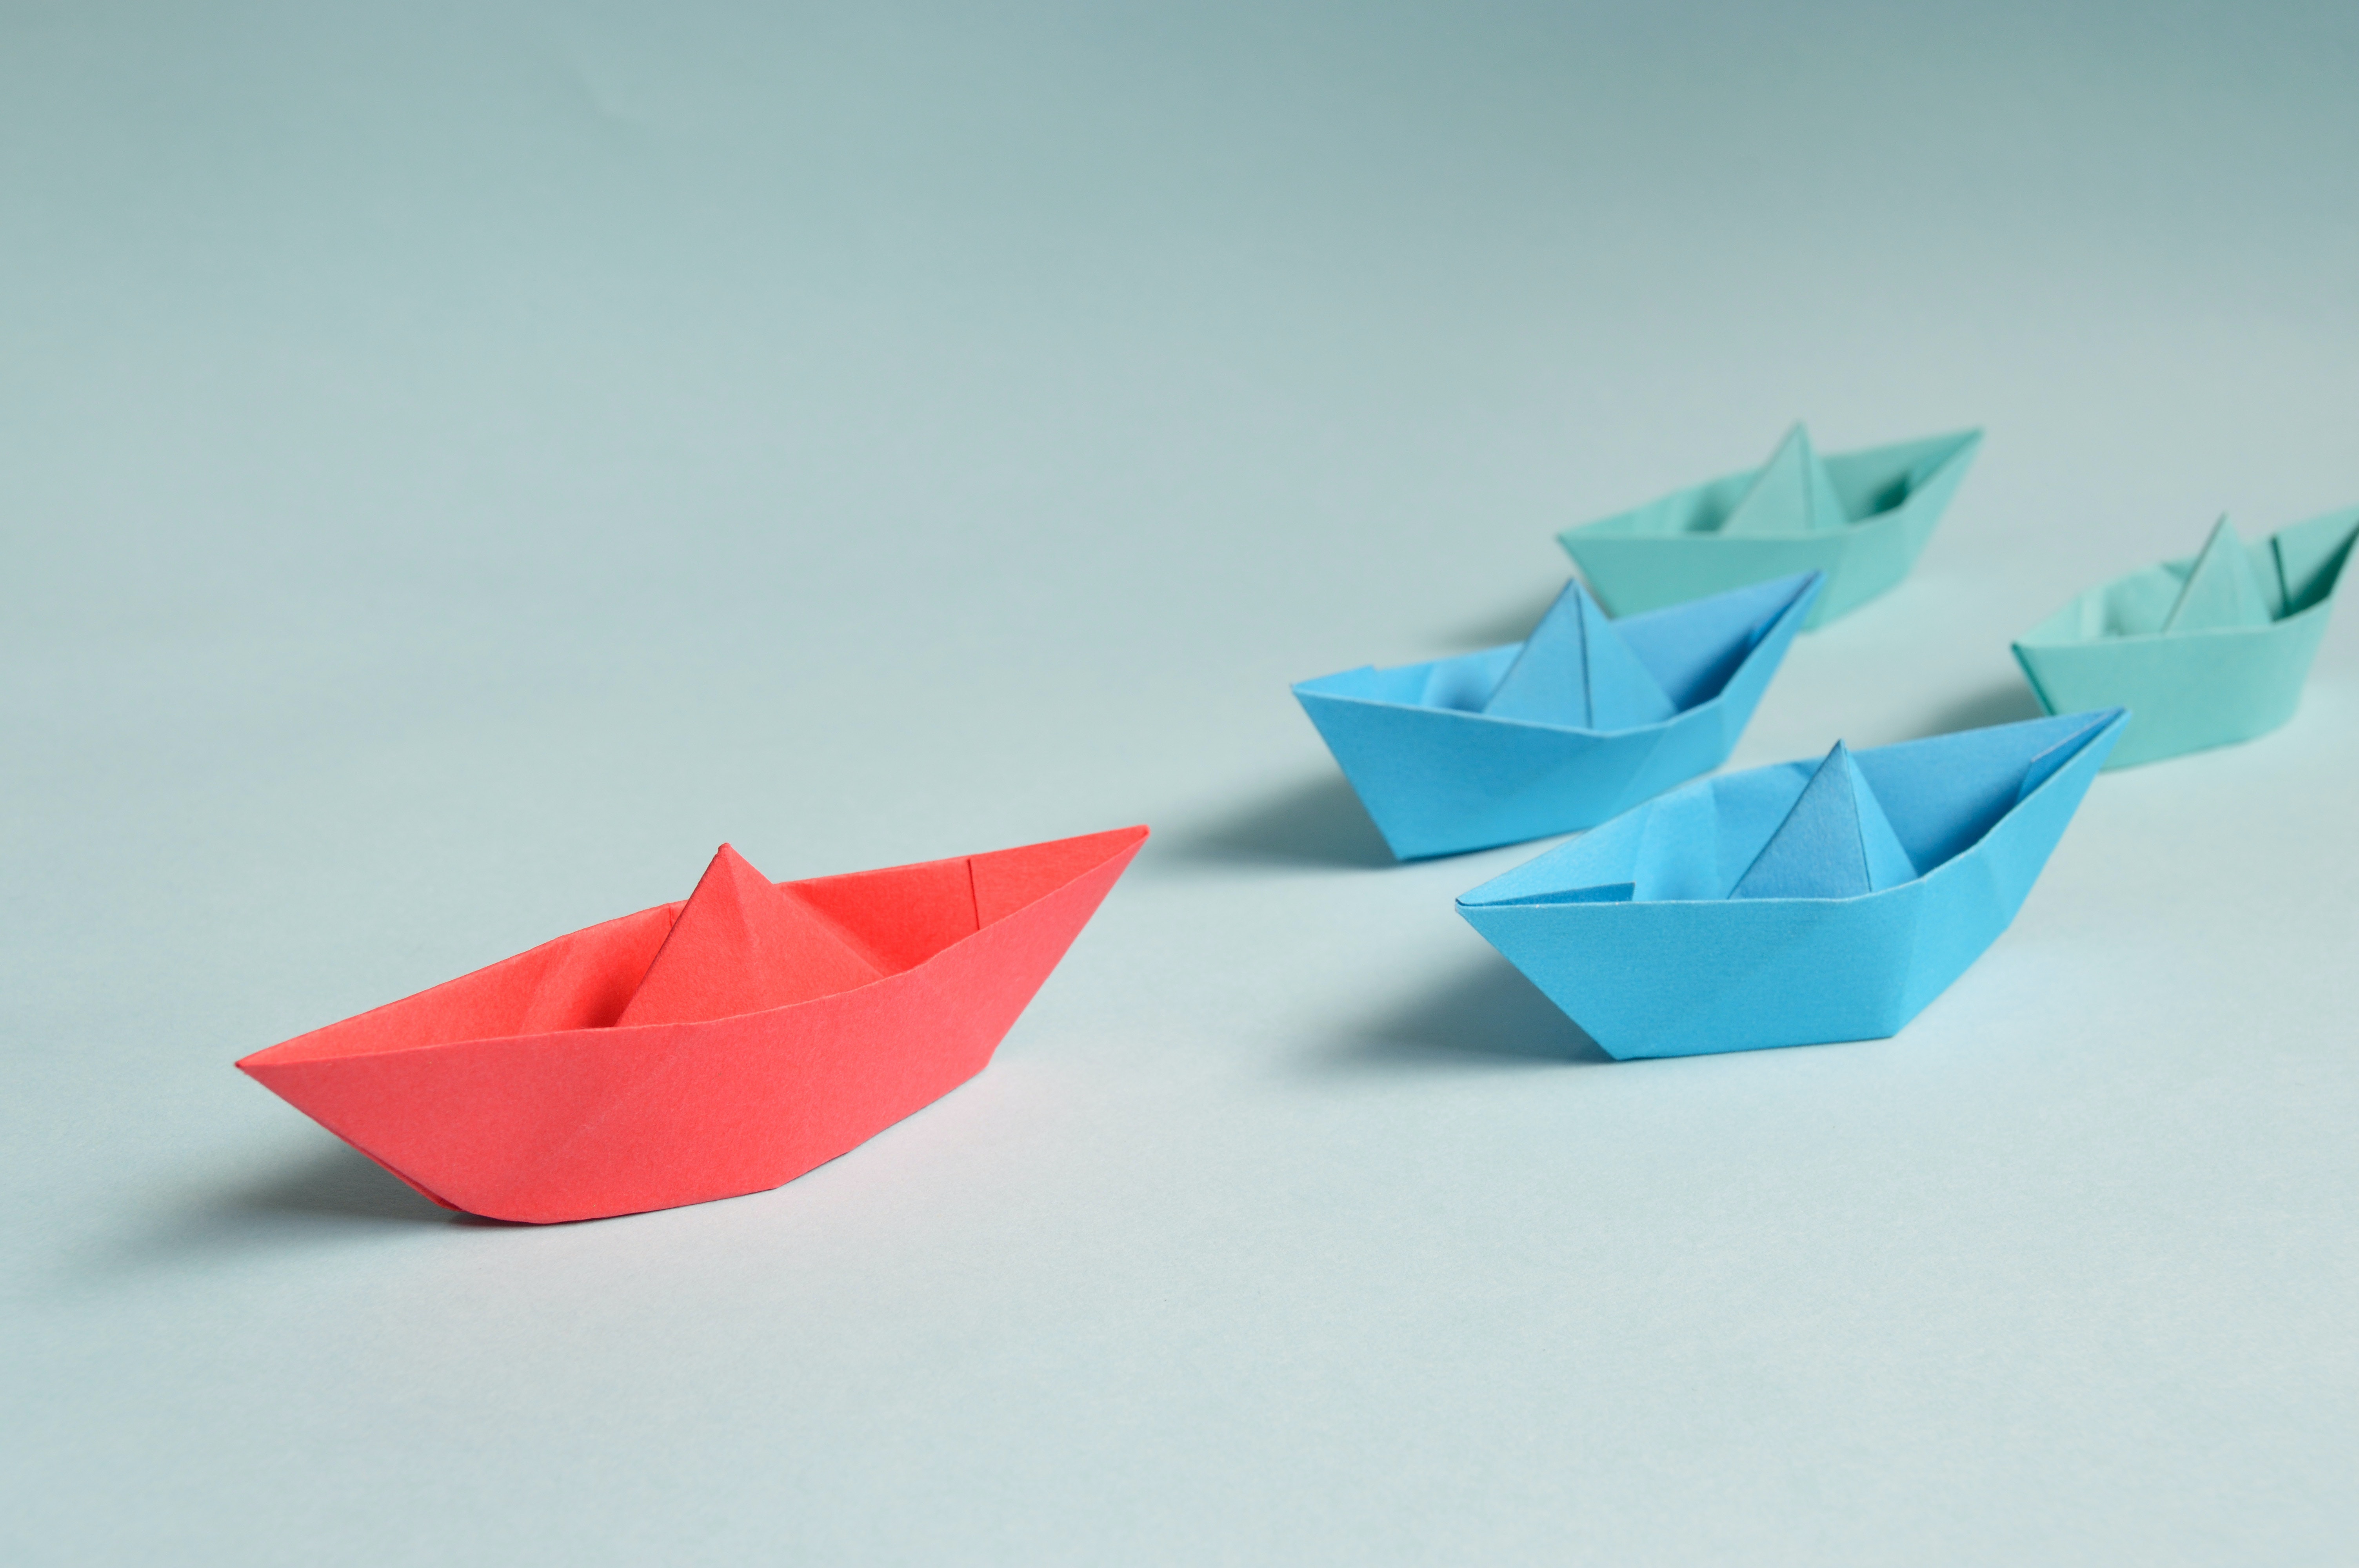 A paper boat leading other boats as an illustration of effective leadership